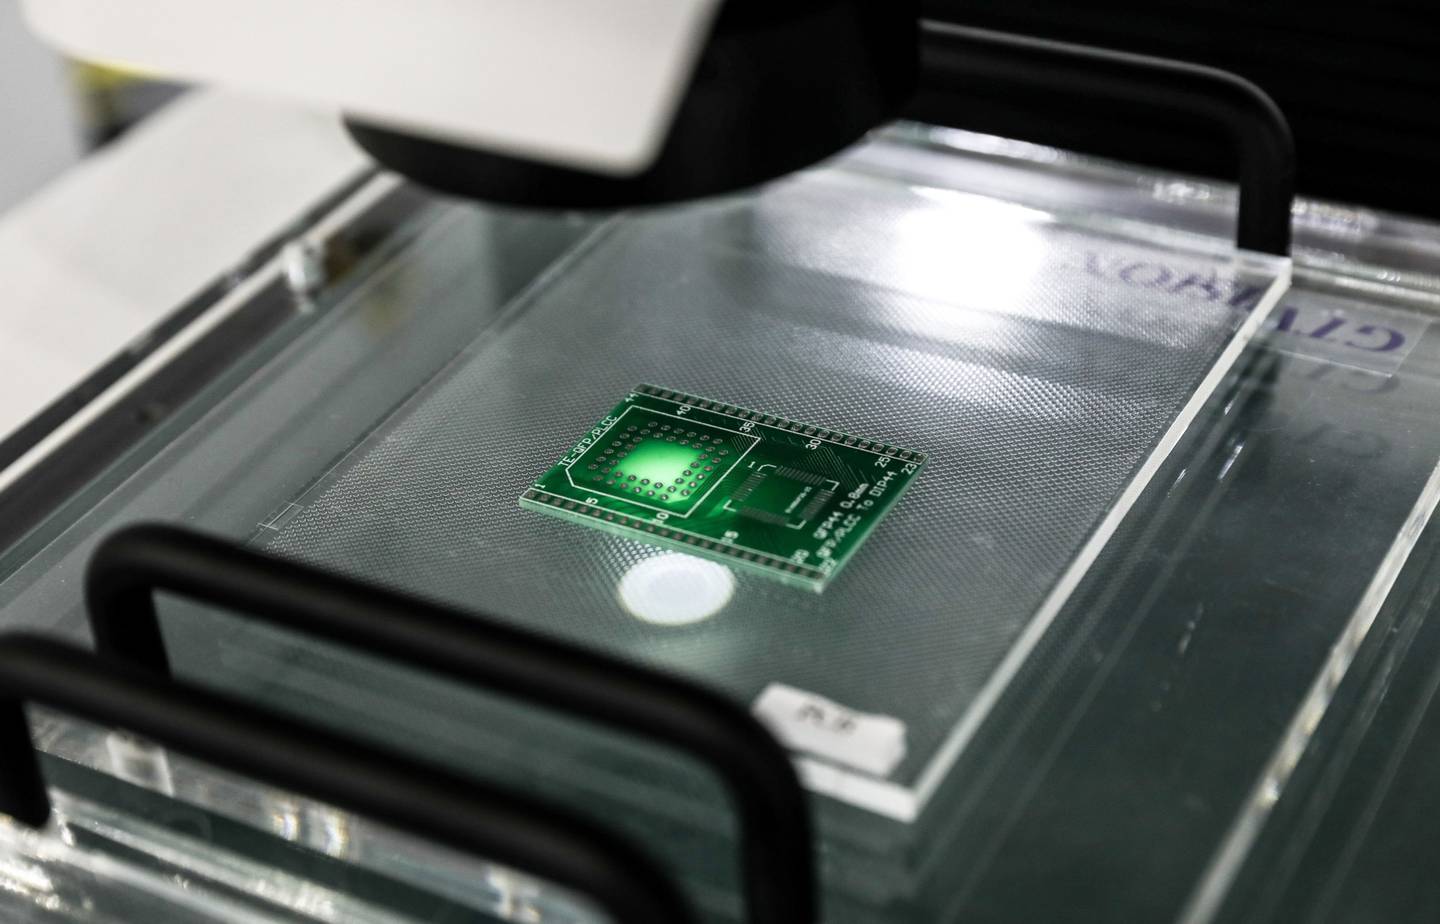 A chip at the Semicon Taiwan exhibition show in Taipei, Taiwan, on Wednesday, Sept. 14, 2022. The show will run through Sept. 16. Photographer: I-Hwa Cheng/Bloomberg